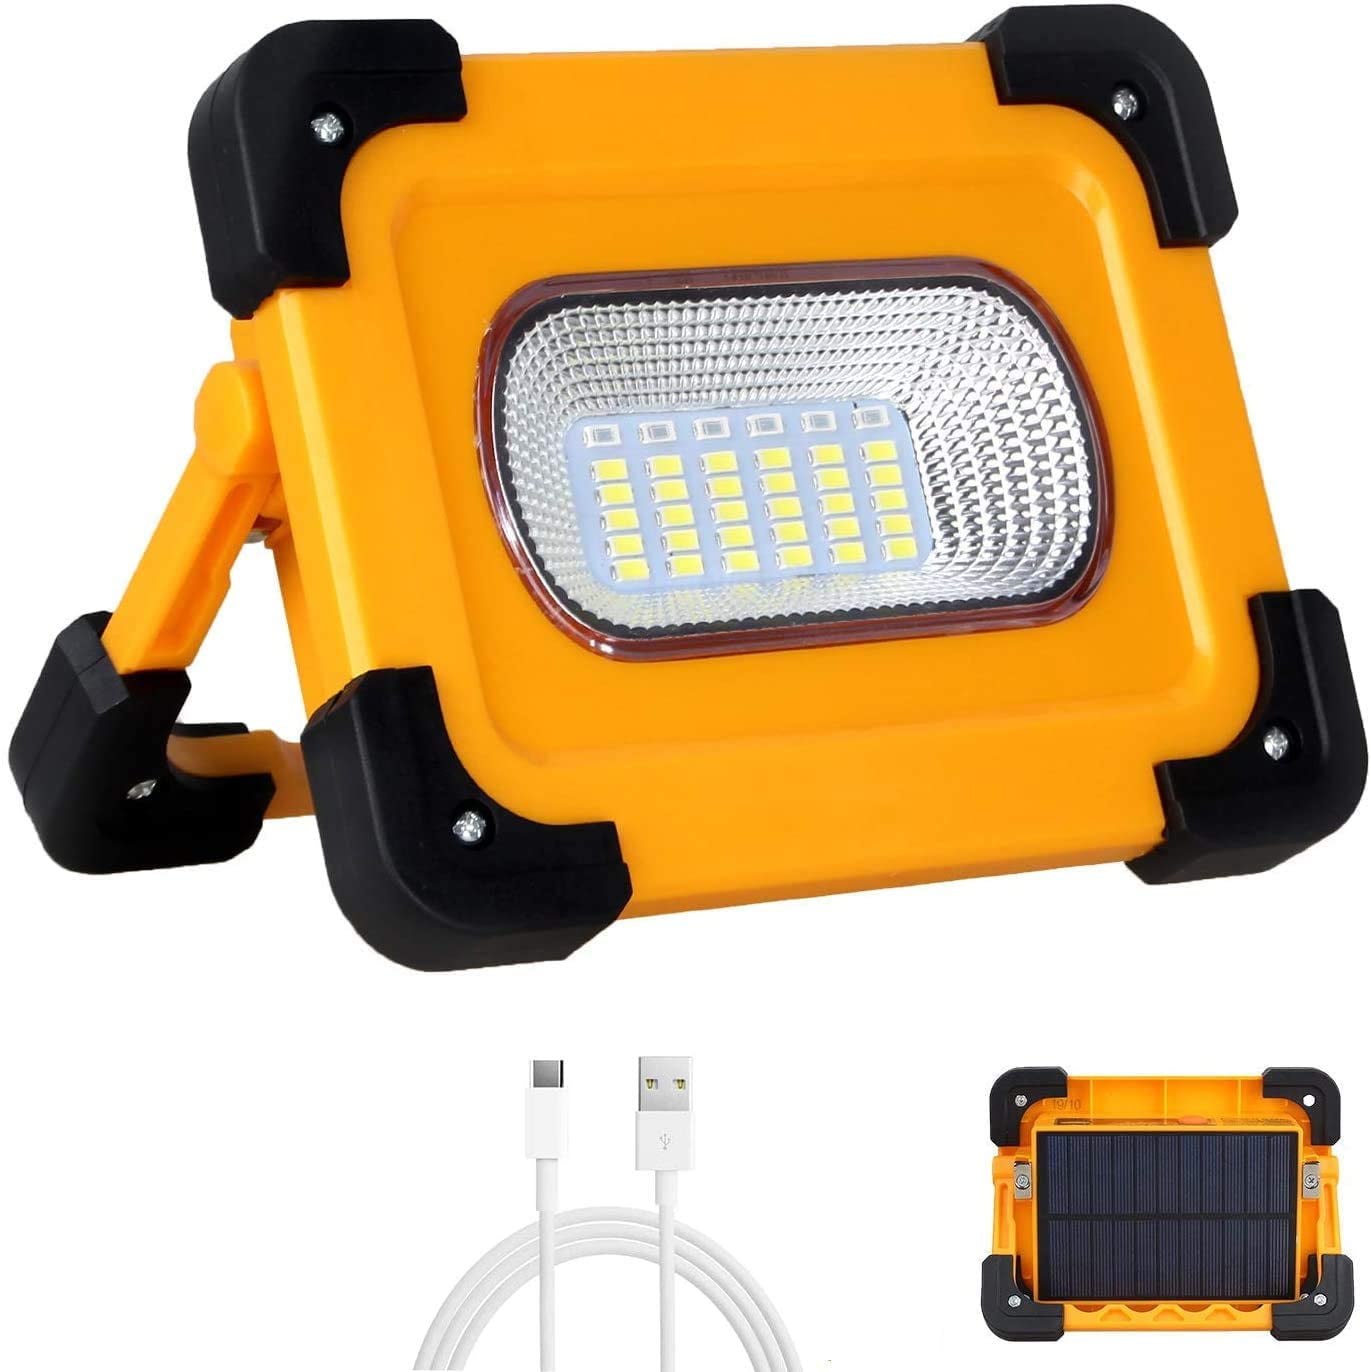 LED Floodlight Rechargeable Outdoor Working Light Camping Lamp Spotlight Lantern 